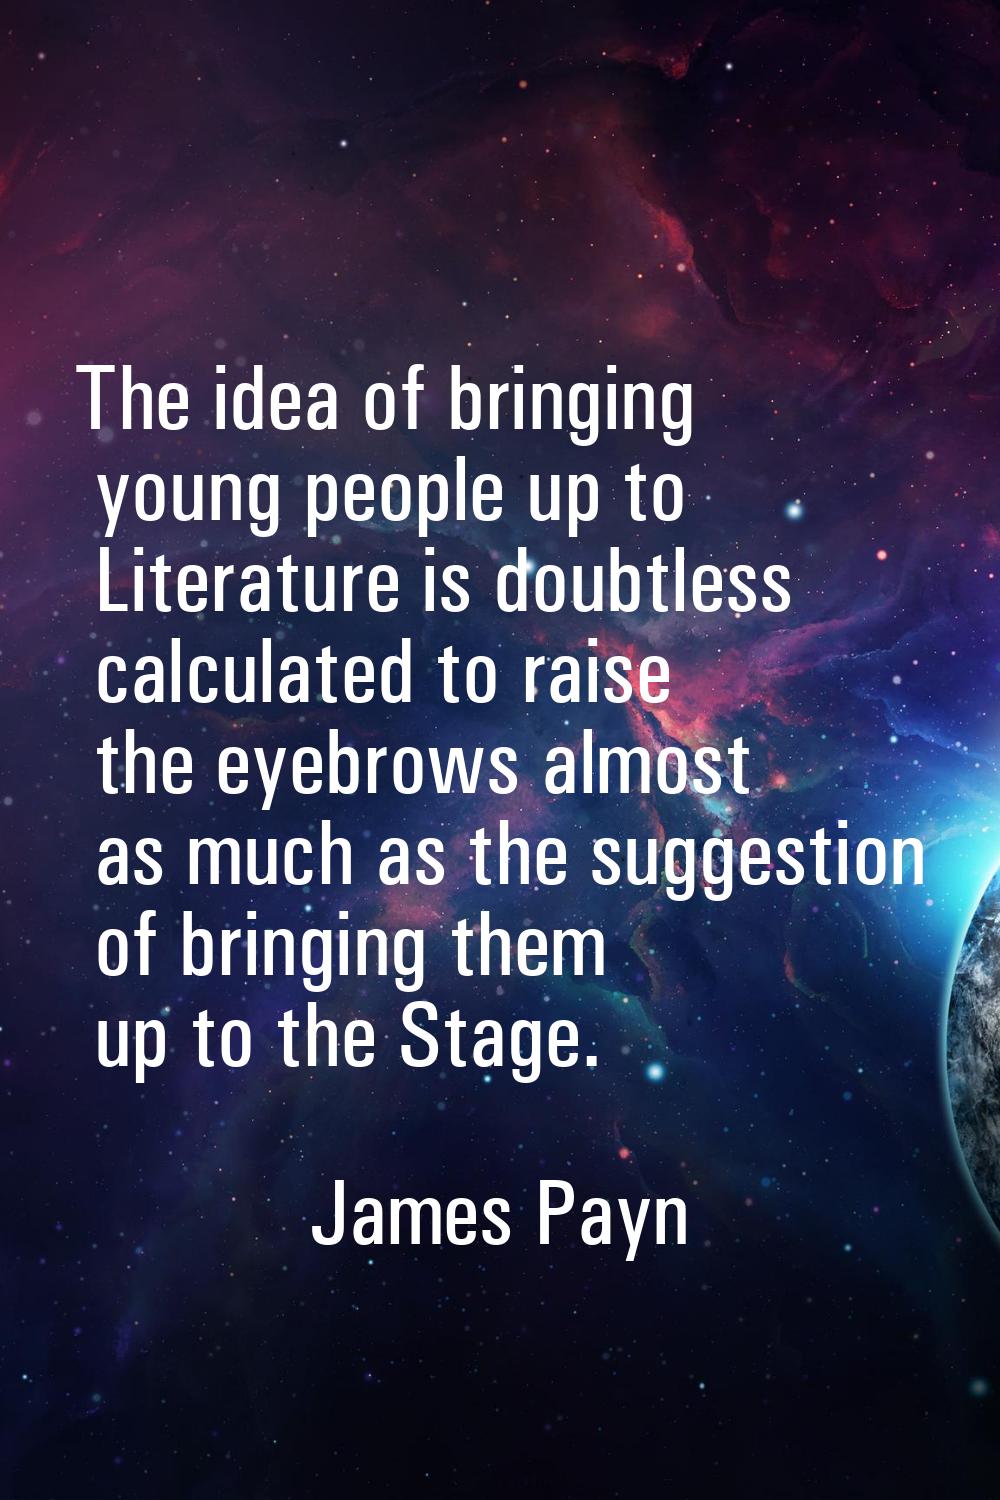 The idea of bringing young people up to Literature is doubtless calculated to raise the eyebrows al